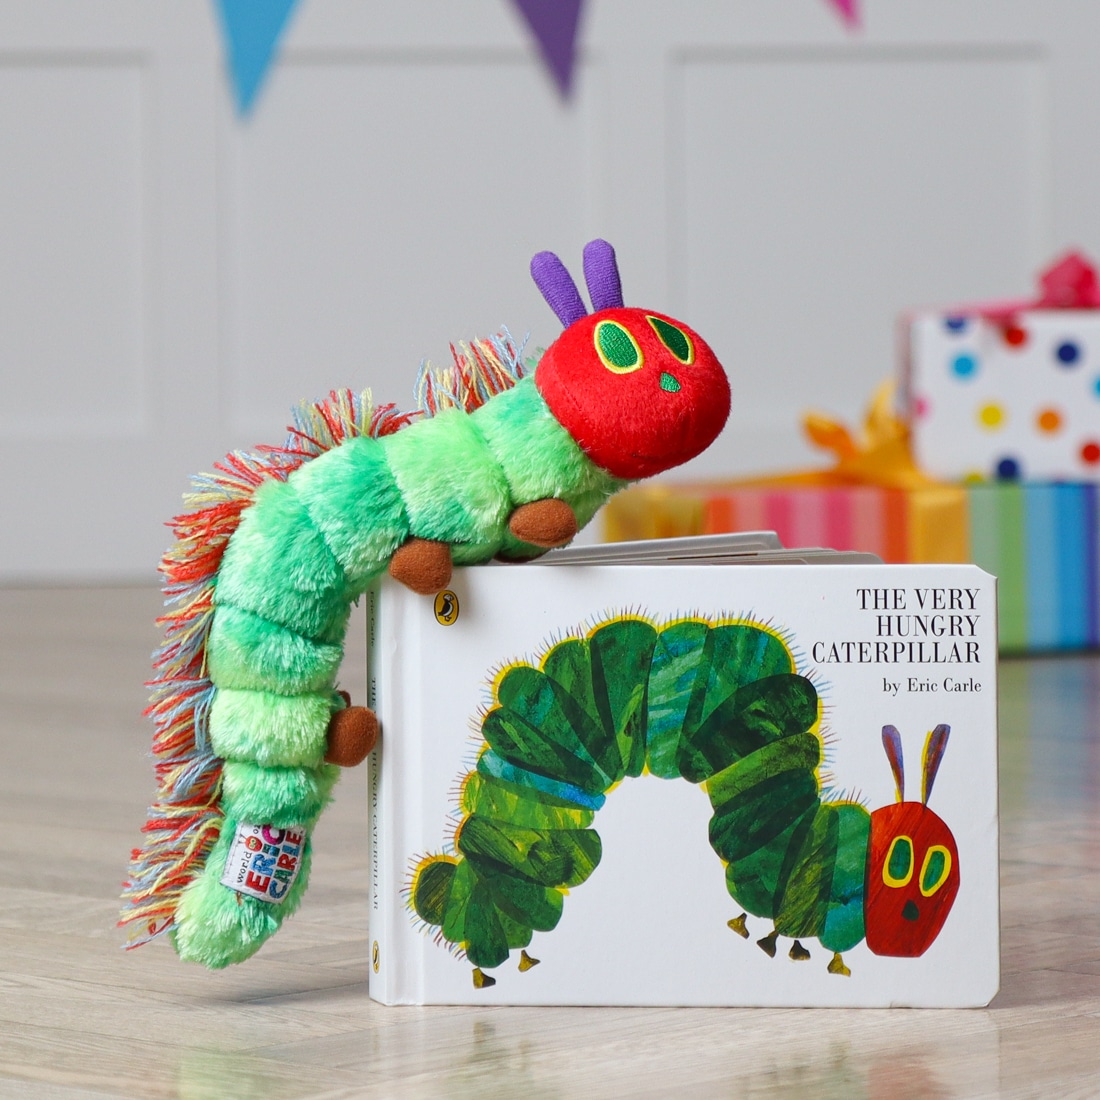 The very hungry caterpillar book and soft toy